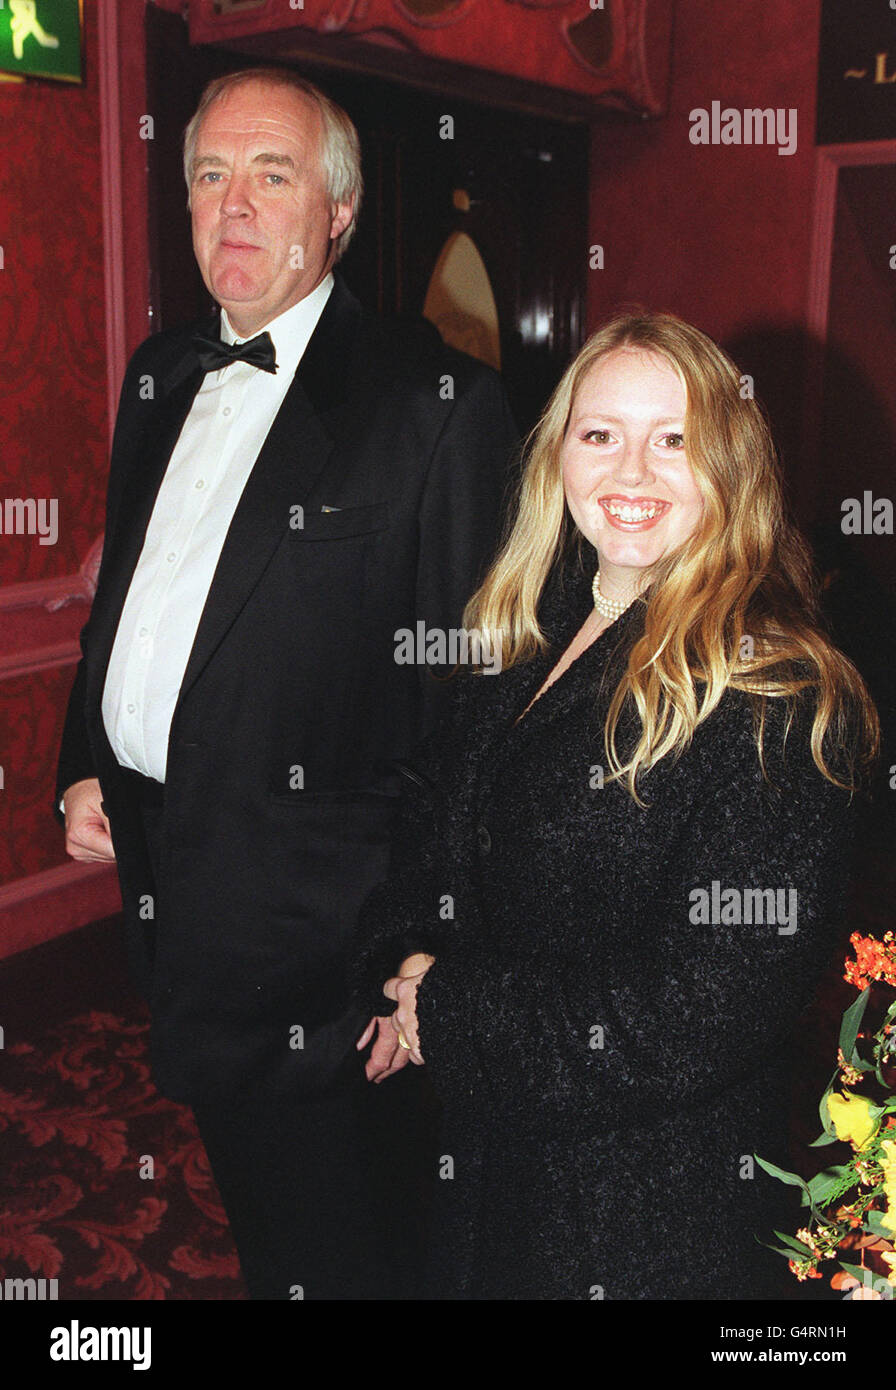 Lyricist Sir Tim Rice arrives at the West End Lyceum Theatre, for the London premiere of Walt Disney's 'The Lion King', a spectacular musical based on the animated movie of the same name. Stock Photo